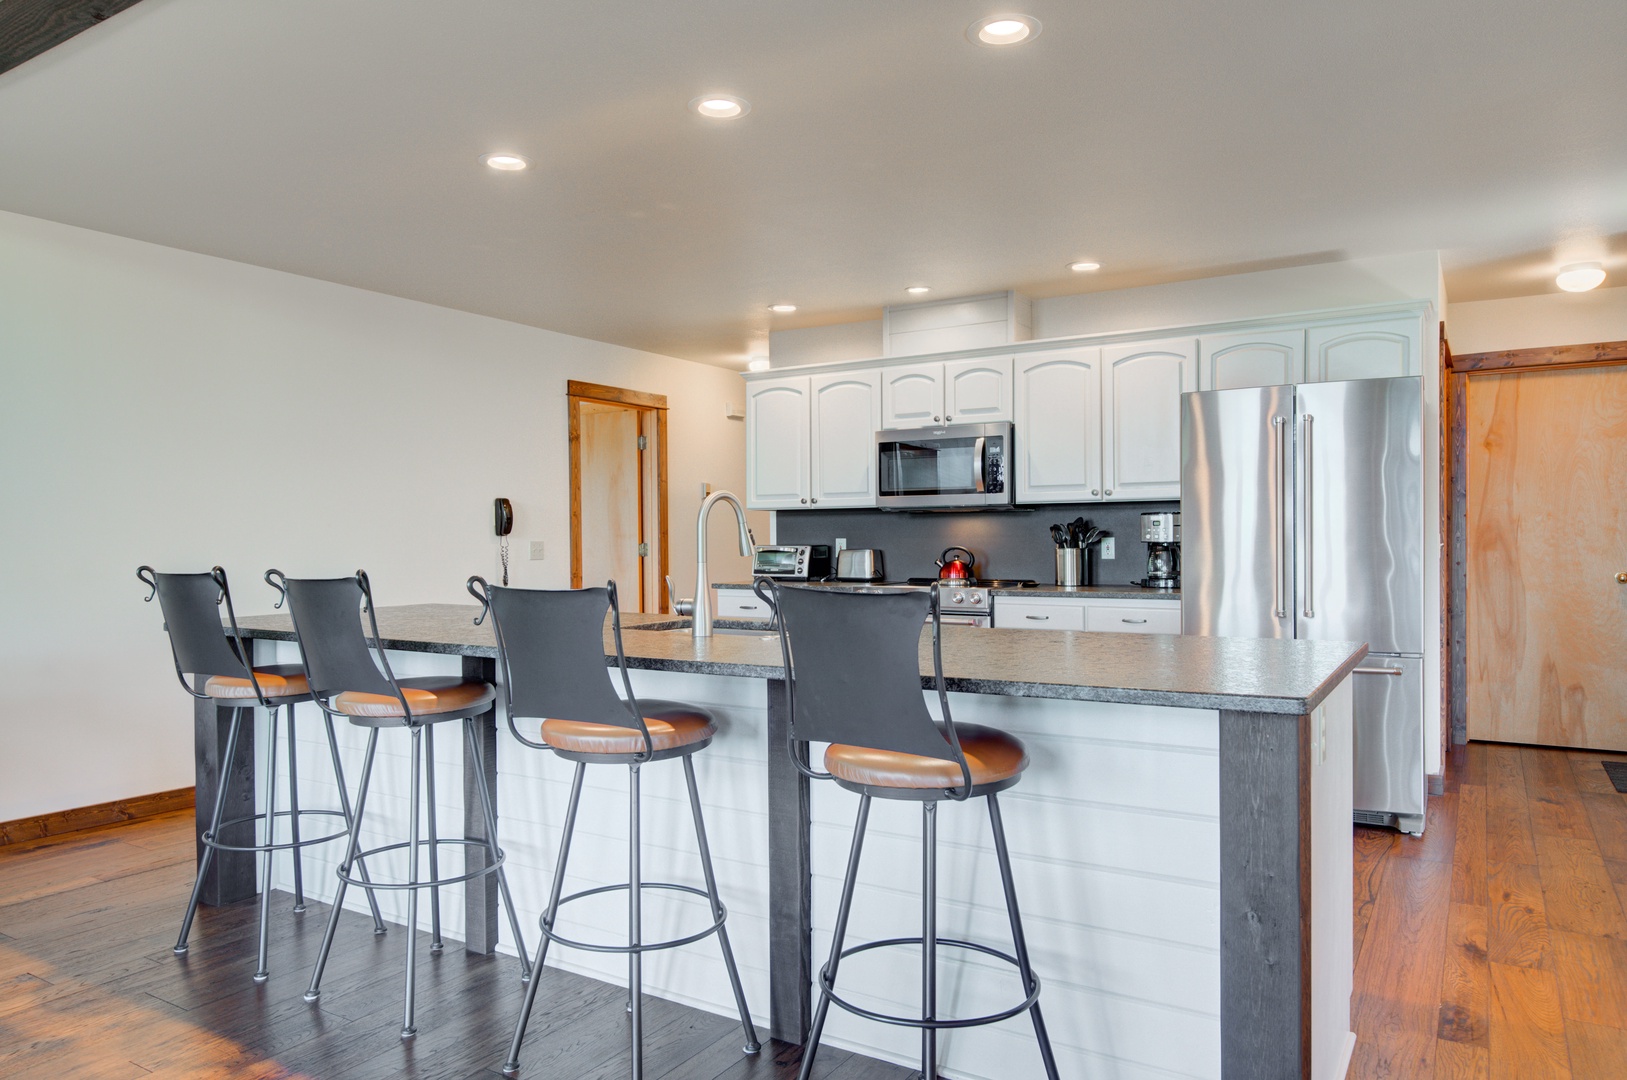 Bozeman Vacation Rentals, The Canyon Lookout - Countertop dining and chef viewing!